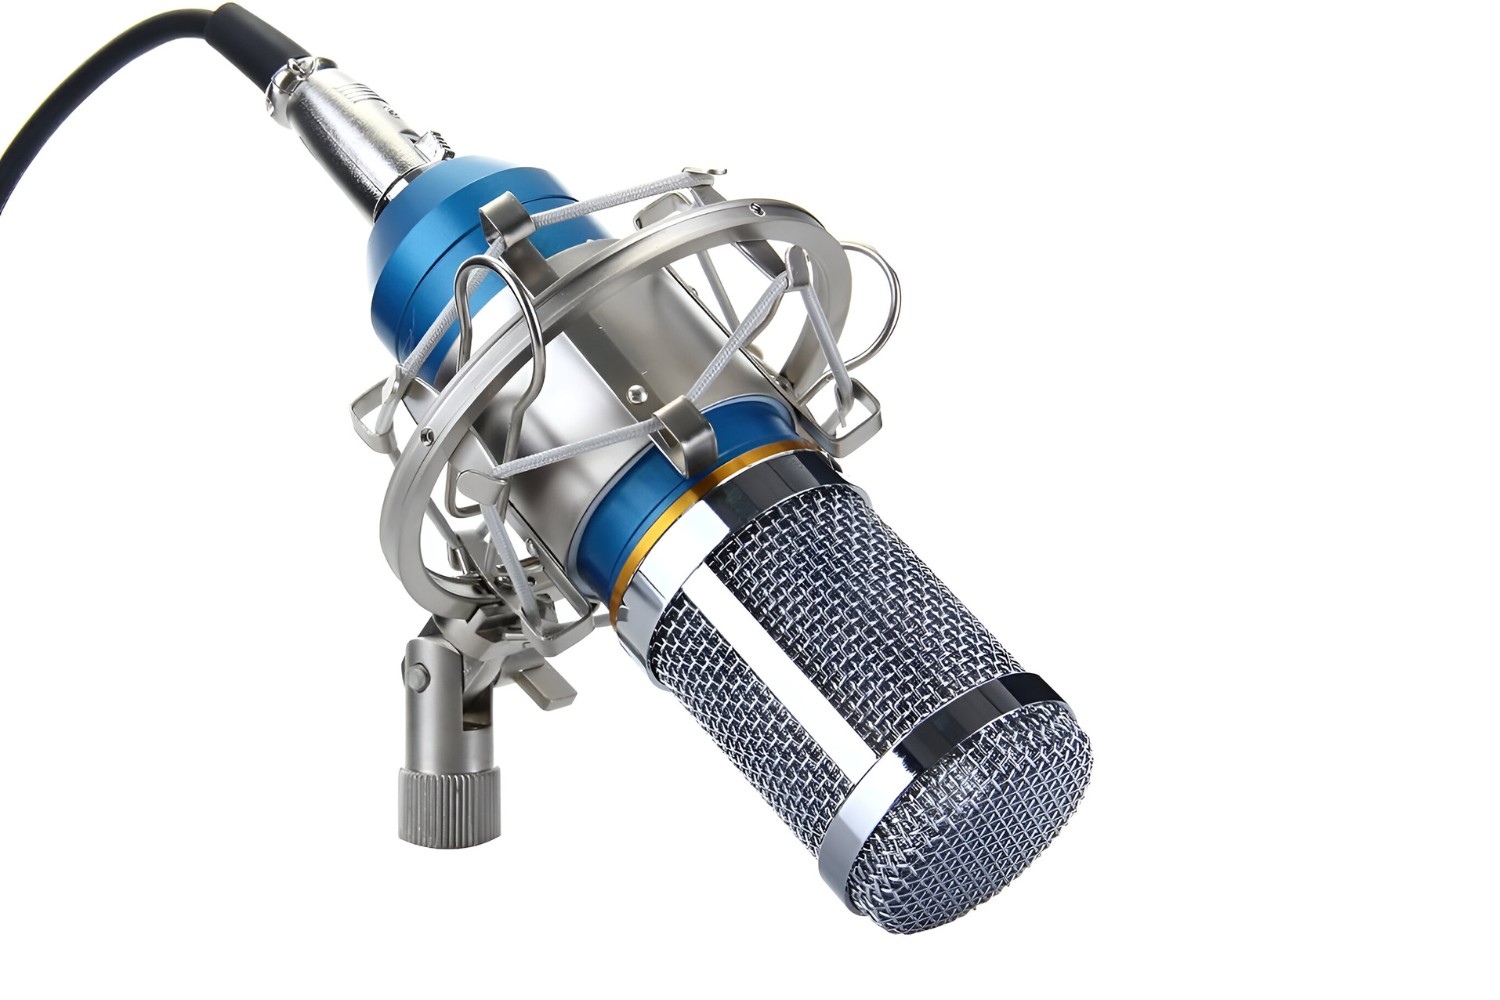 LYPUlight Condenser Microphone – Why Does It Not Work